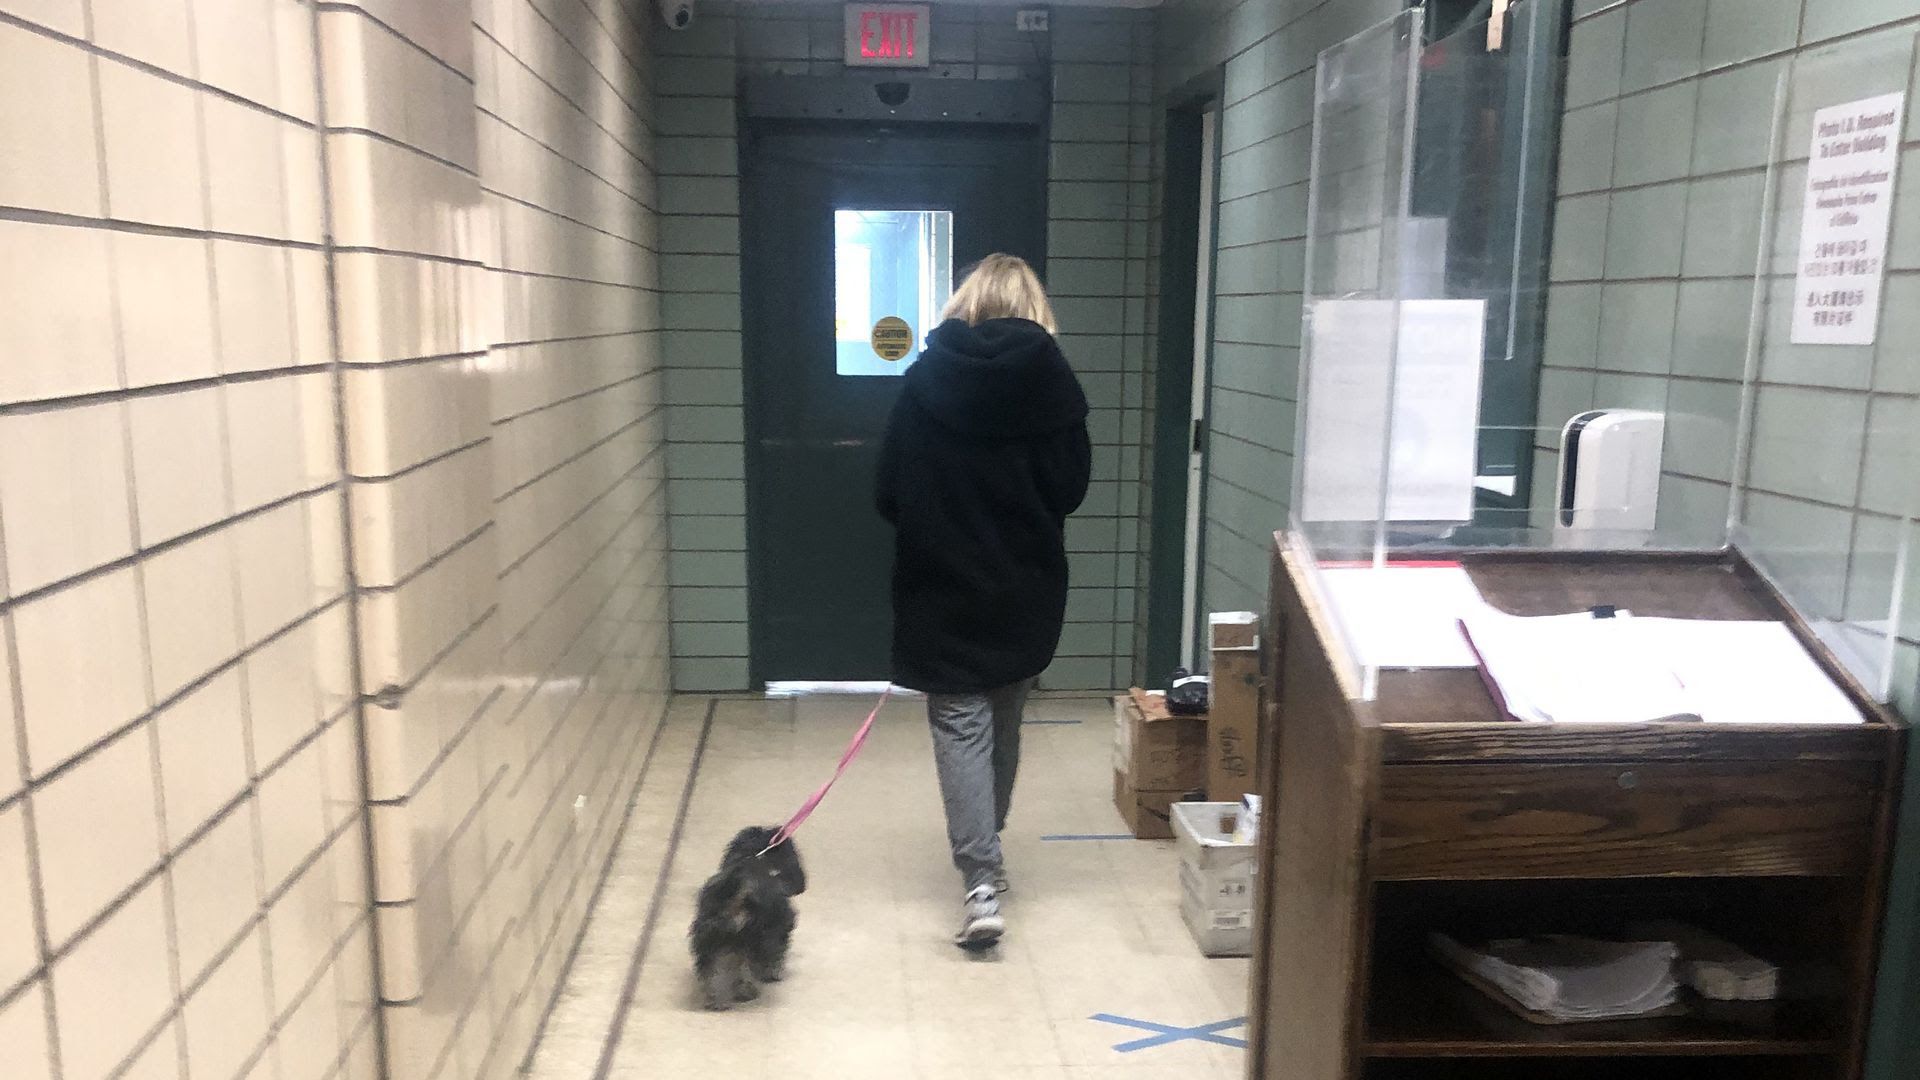 Woman walking away from the camera with a dog on leash, towards an exit door.